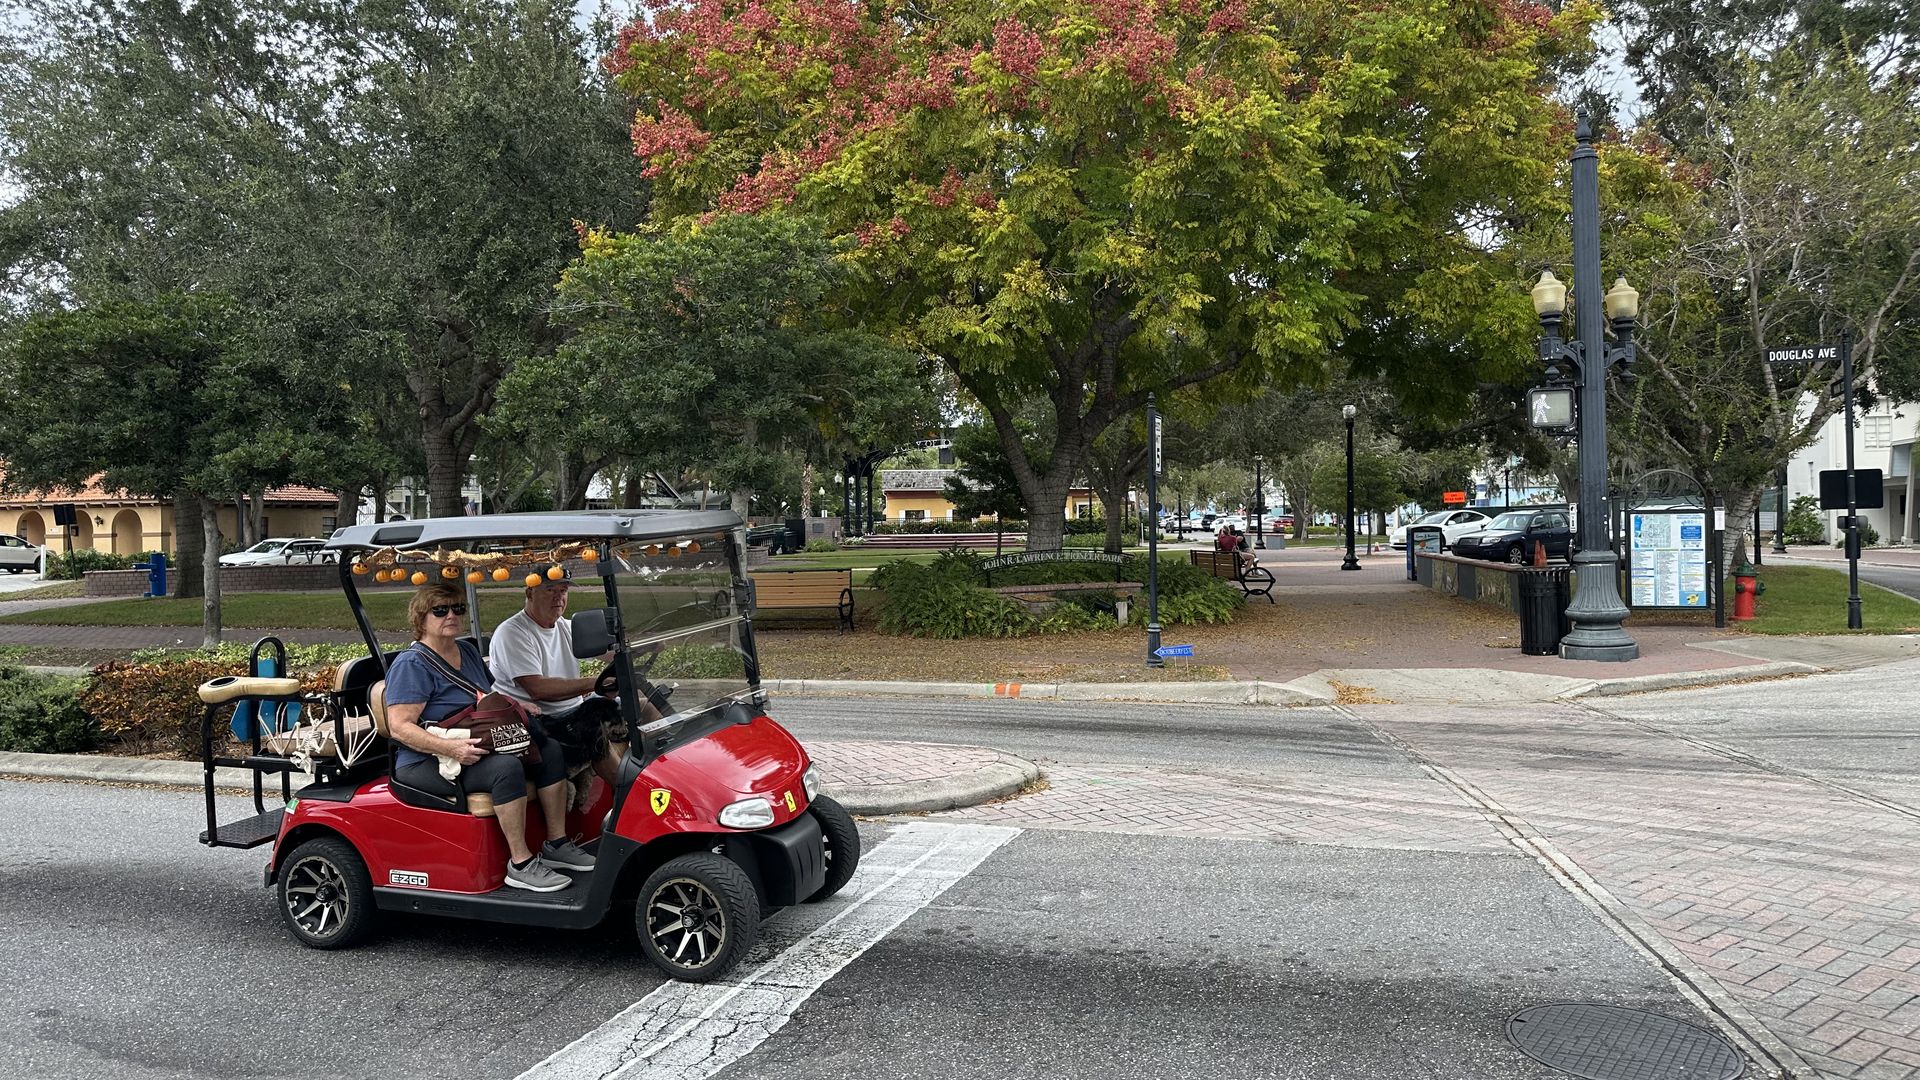 a couple and their dog riding in a golf cart at a Dunedin intersection